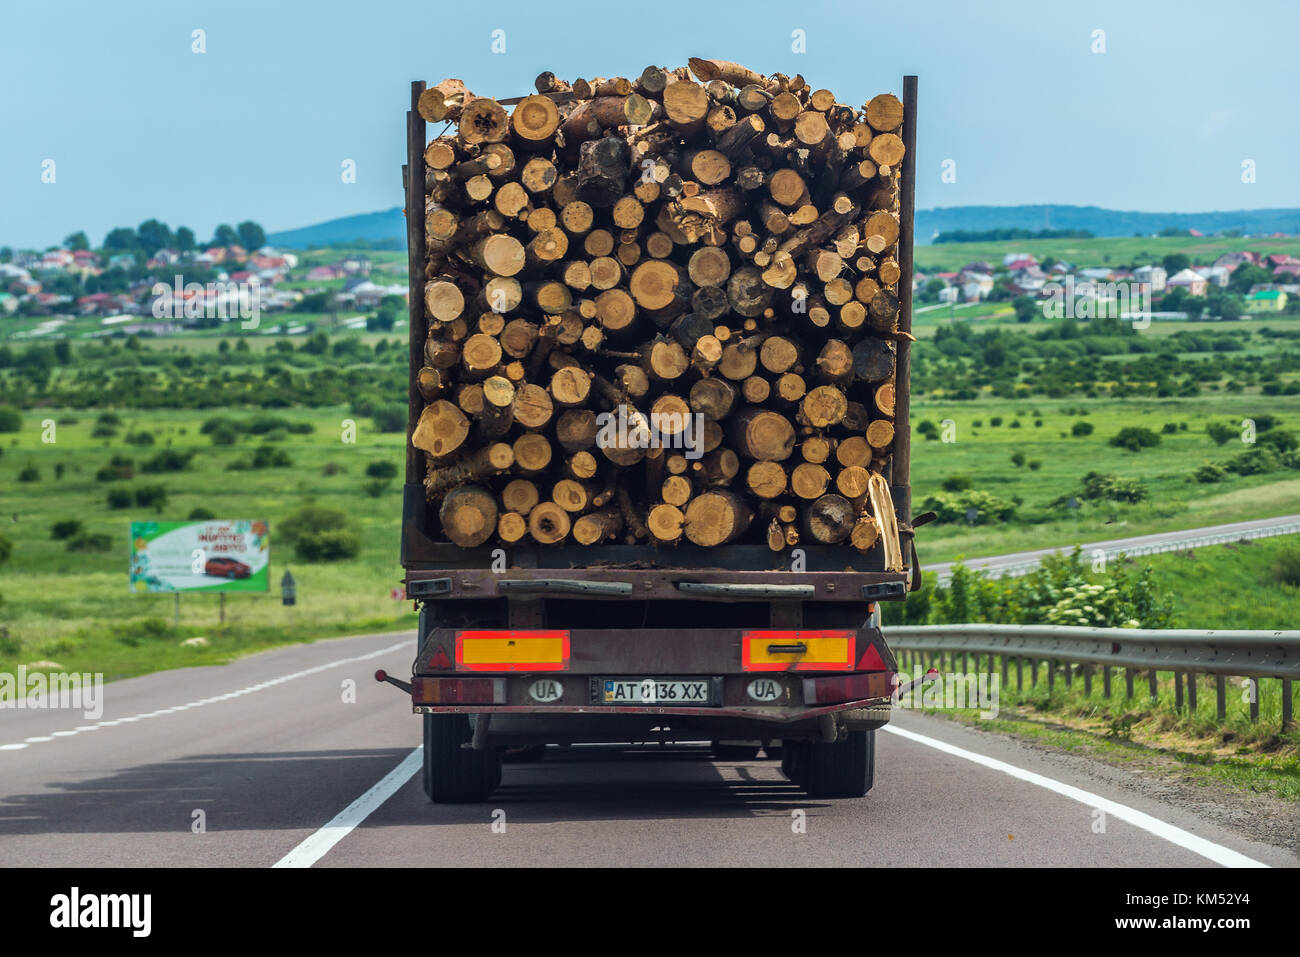 Truck loaded with wood logs on the road in Ukraine Stock Photo - Alamy